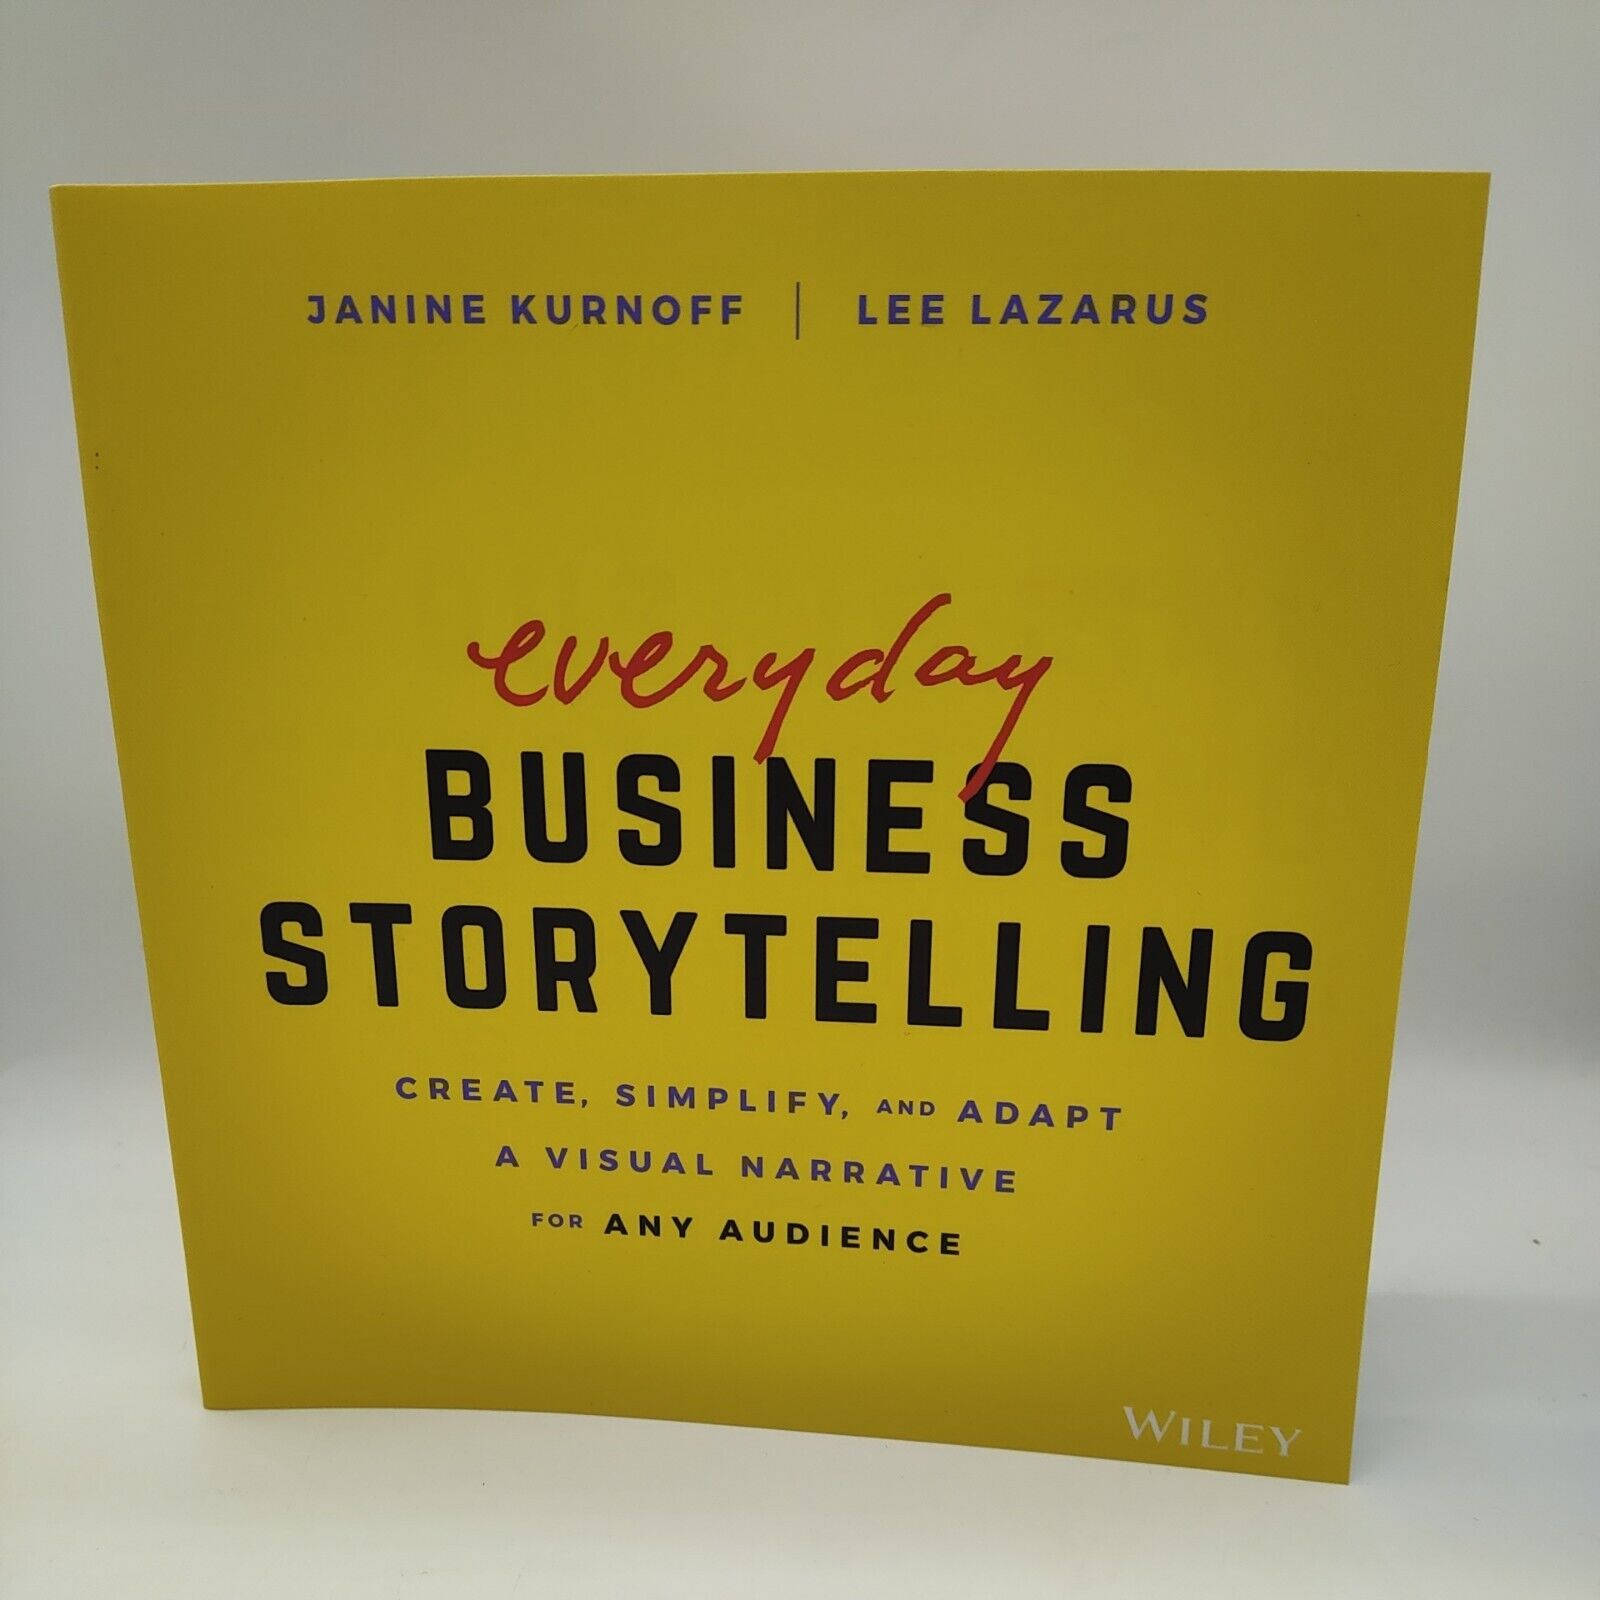 Master Business Storytelling with Visual Narrative